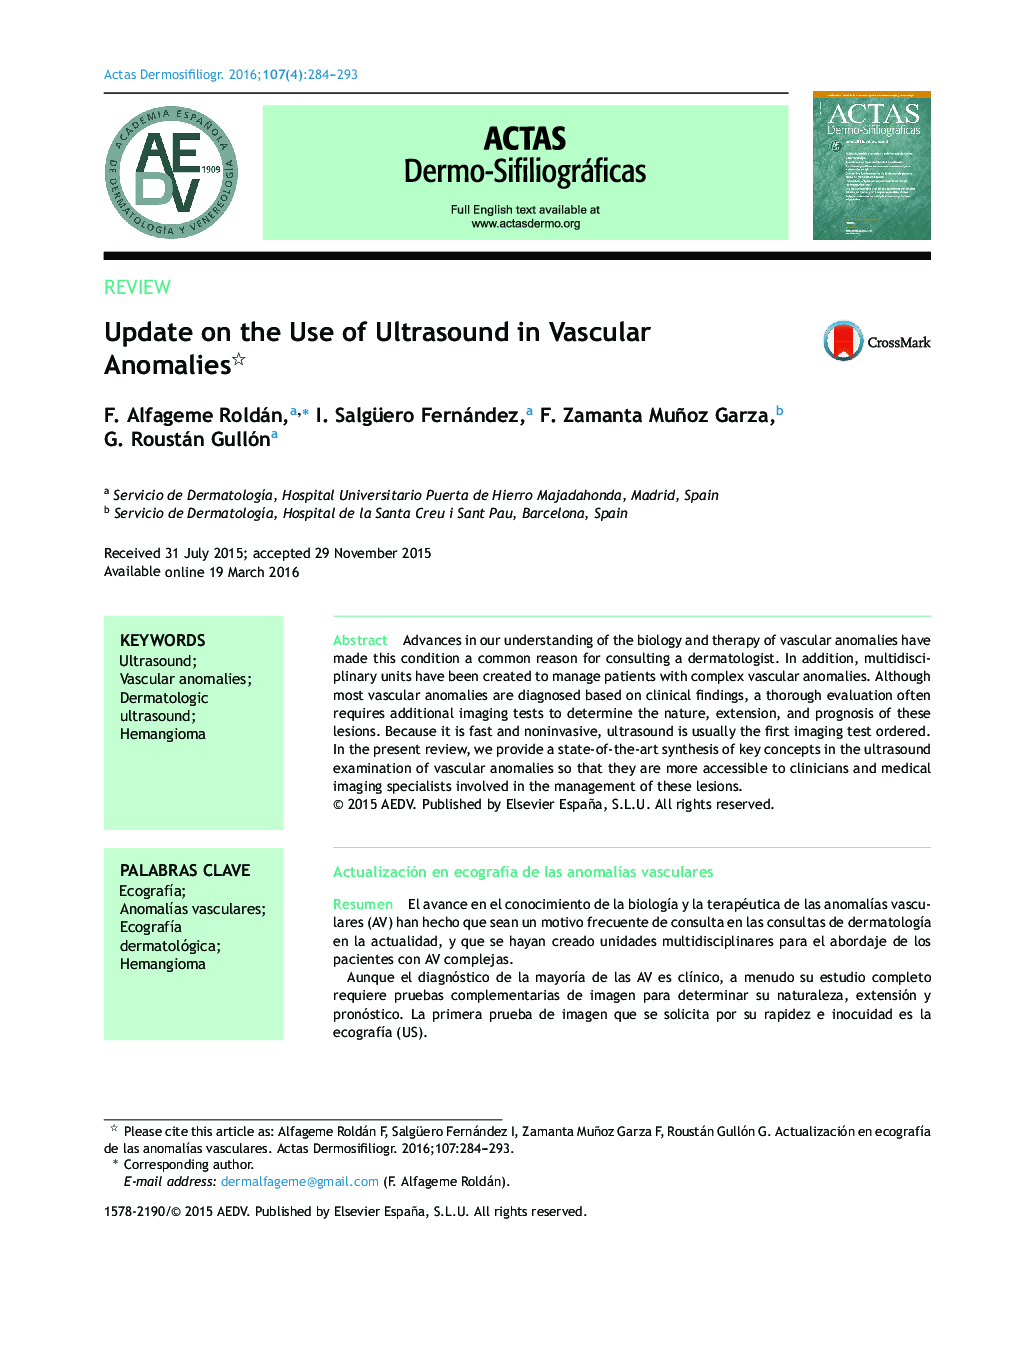 Update on the Use of Ultrasound in Vascular Anomalies 